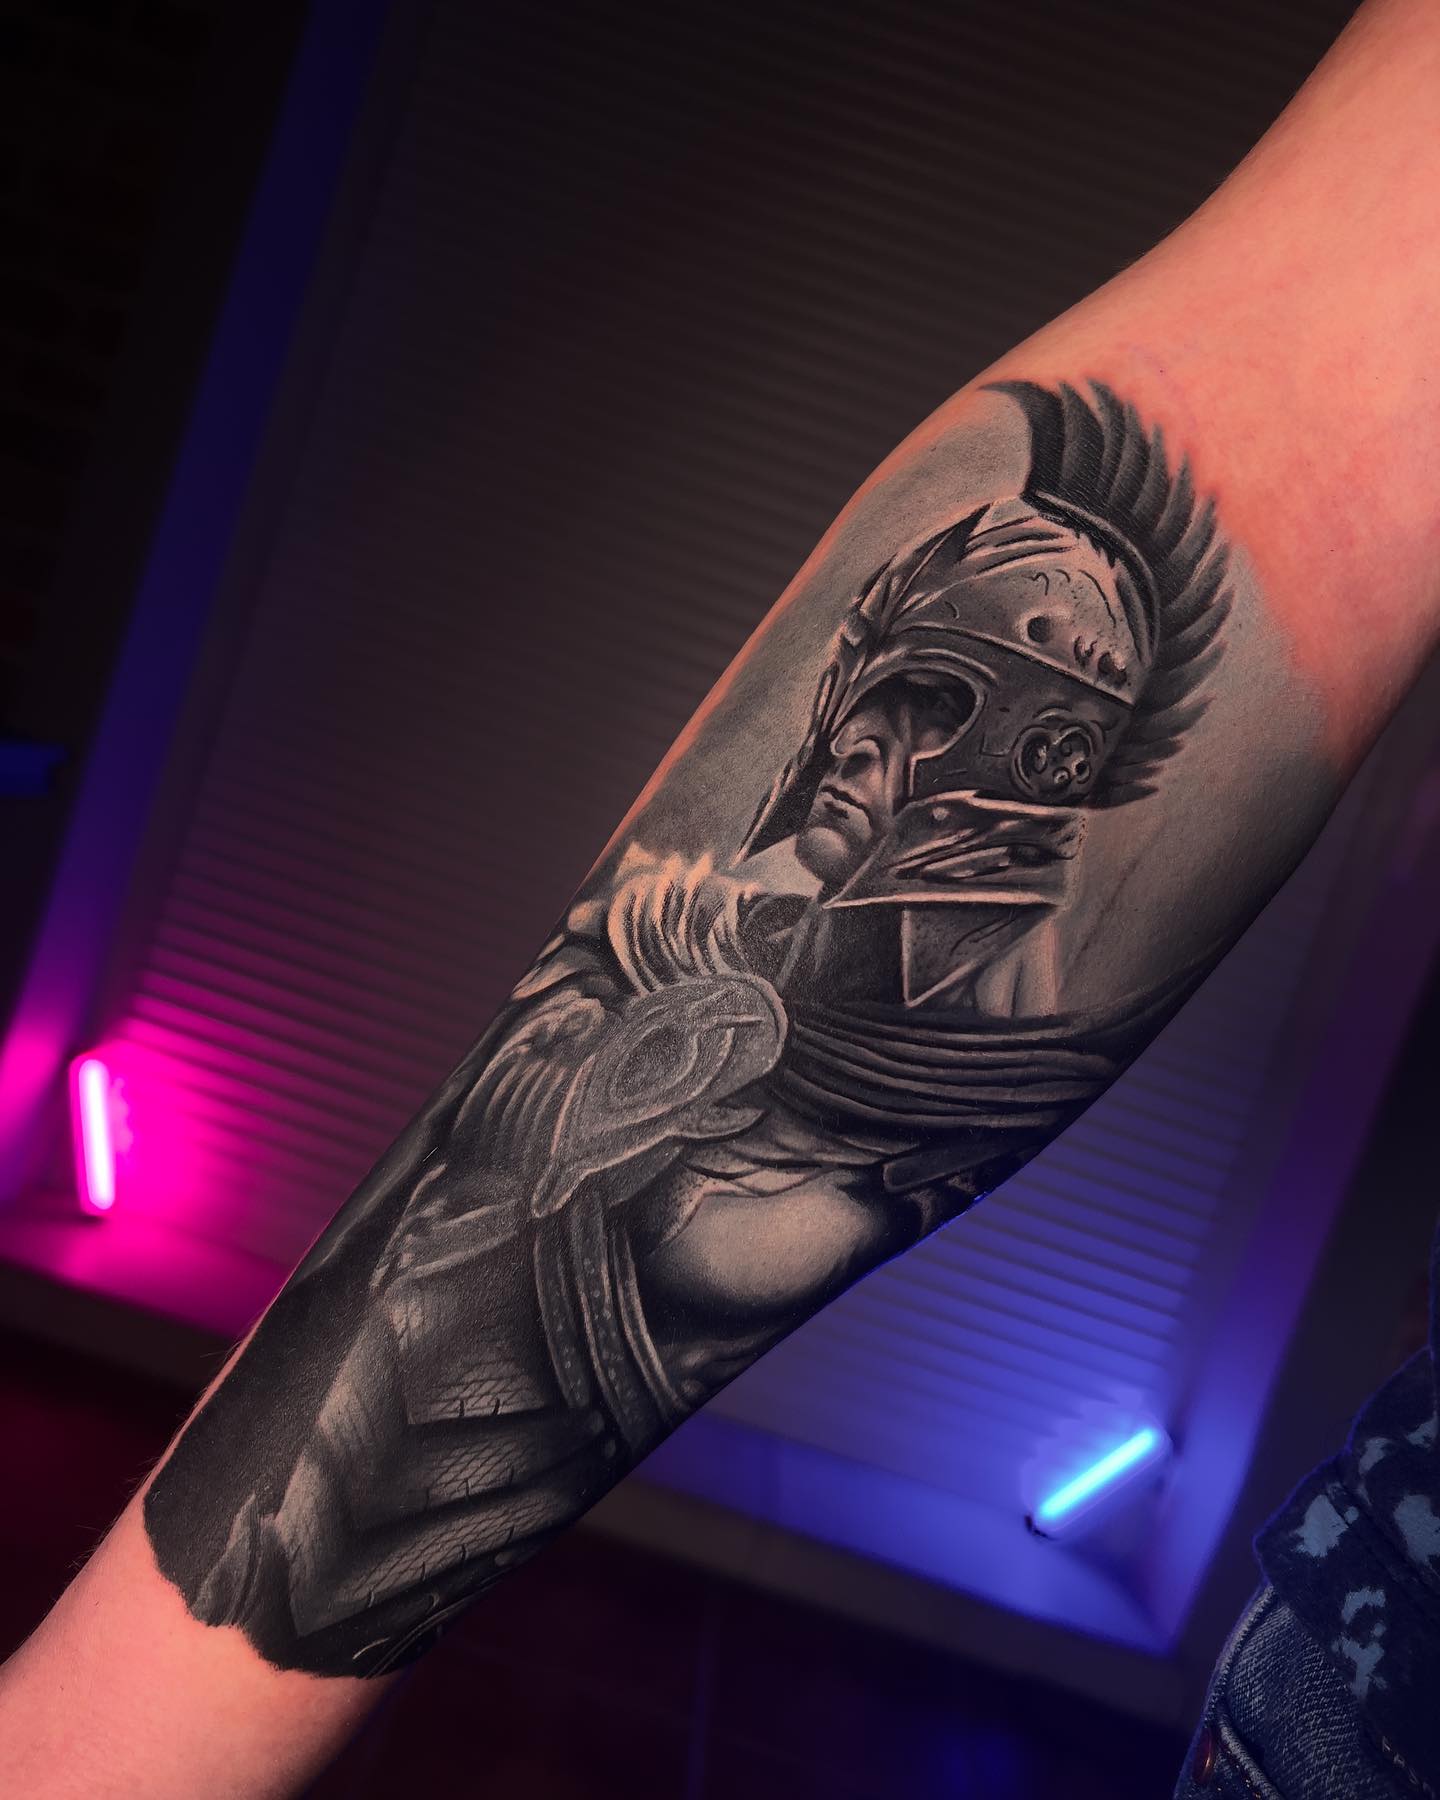 101 Amazing Spartan Tattoo Designs You Need To See! | Spartan tattoo,  Gladiator tattoo, Tattoo designs